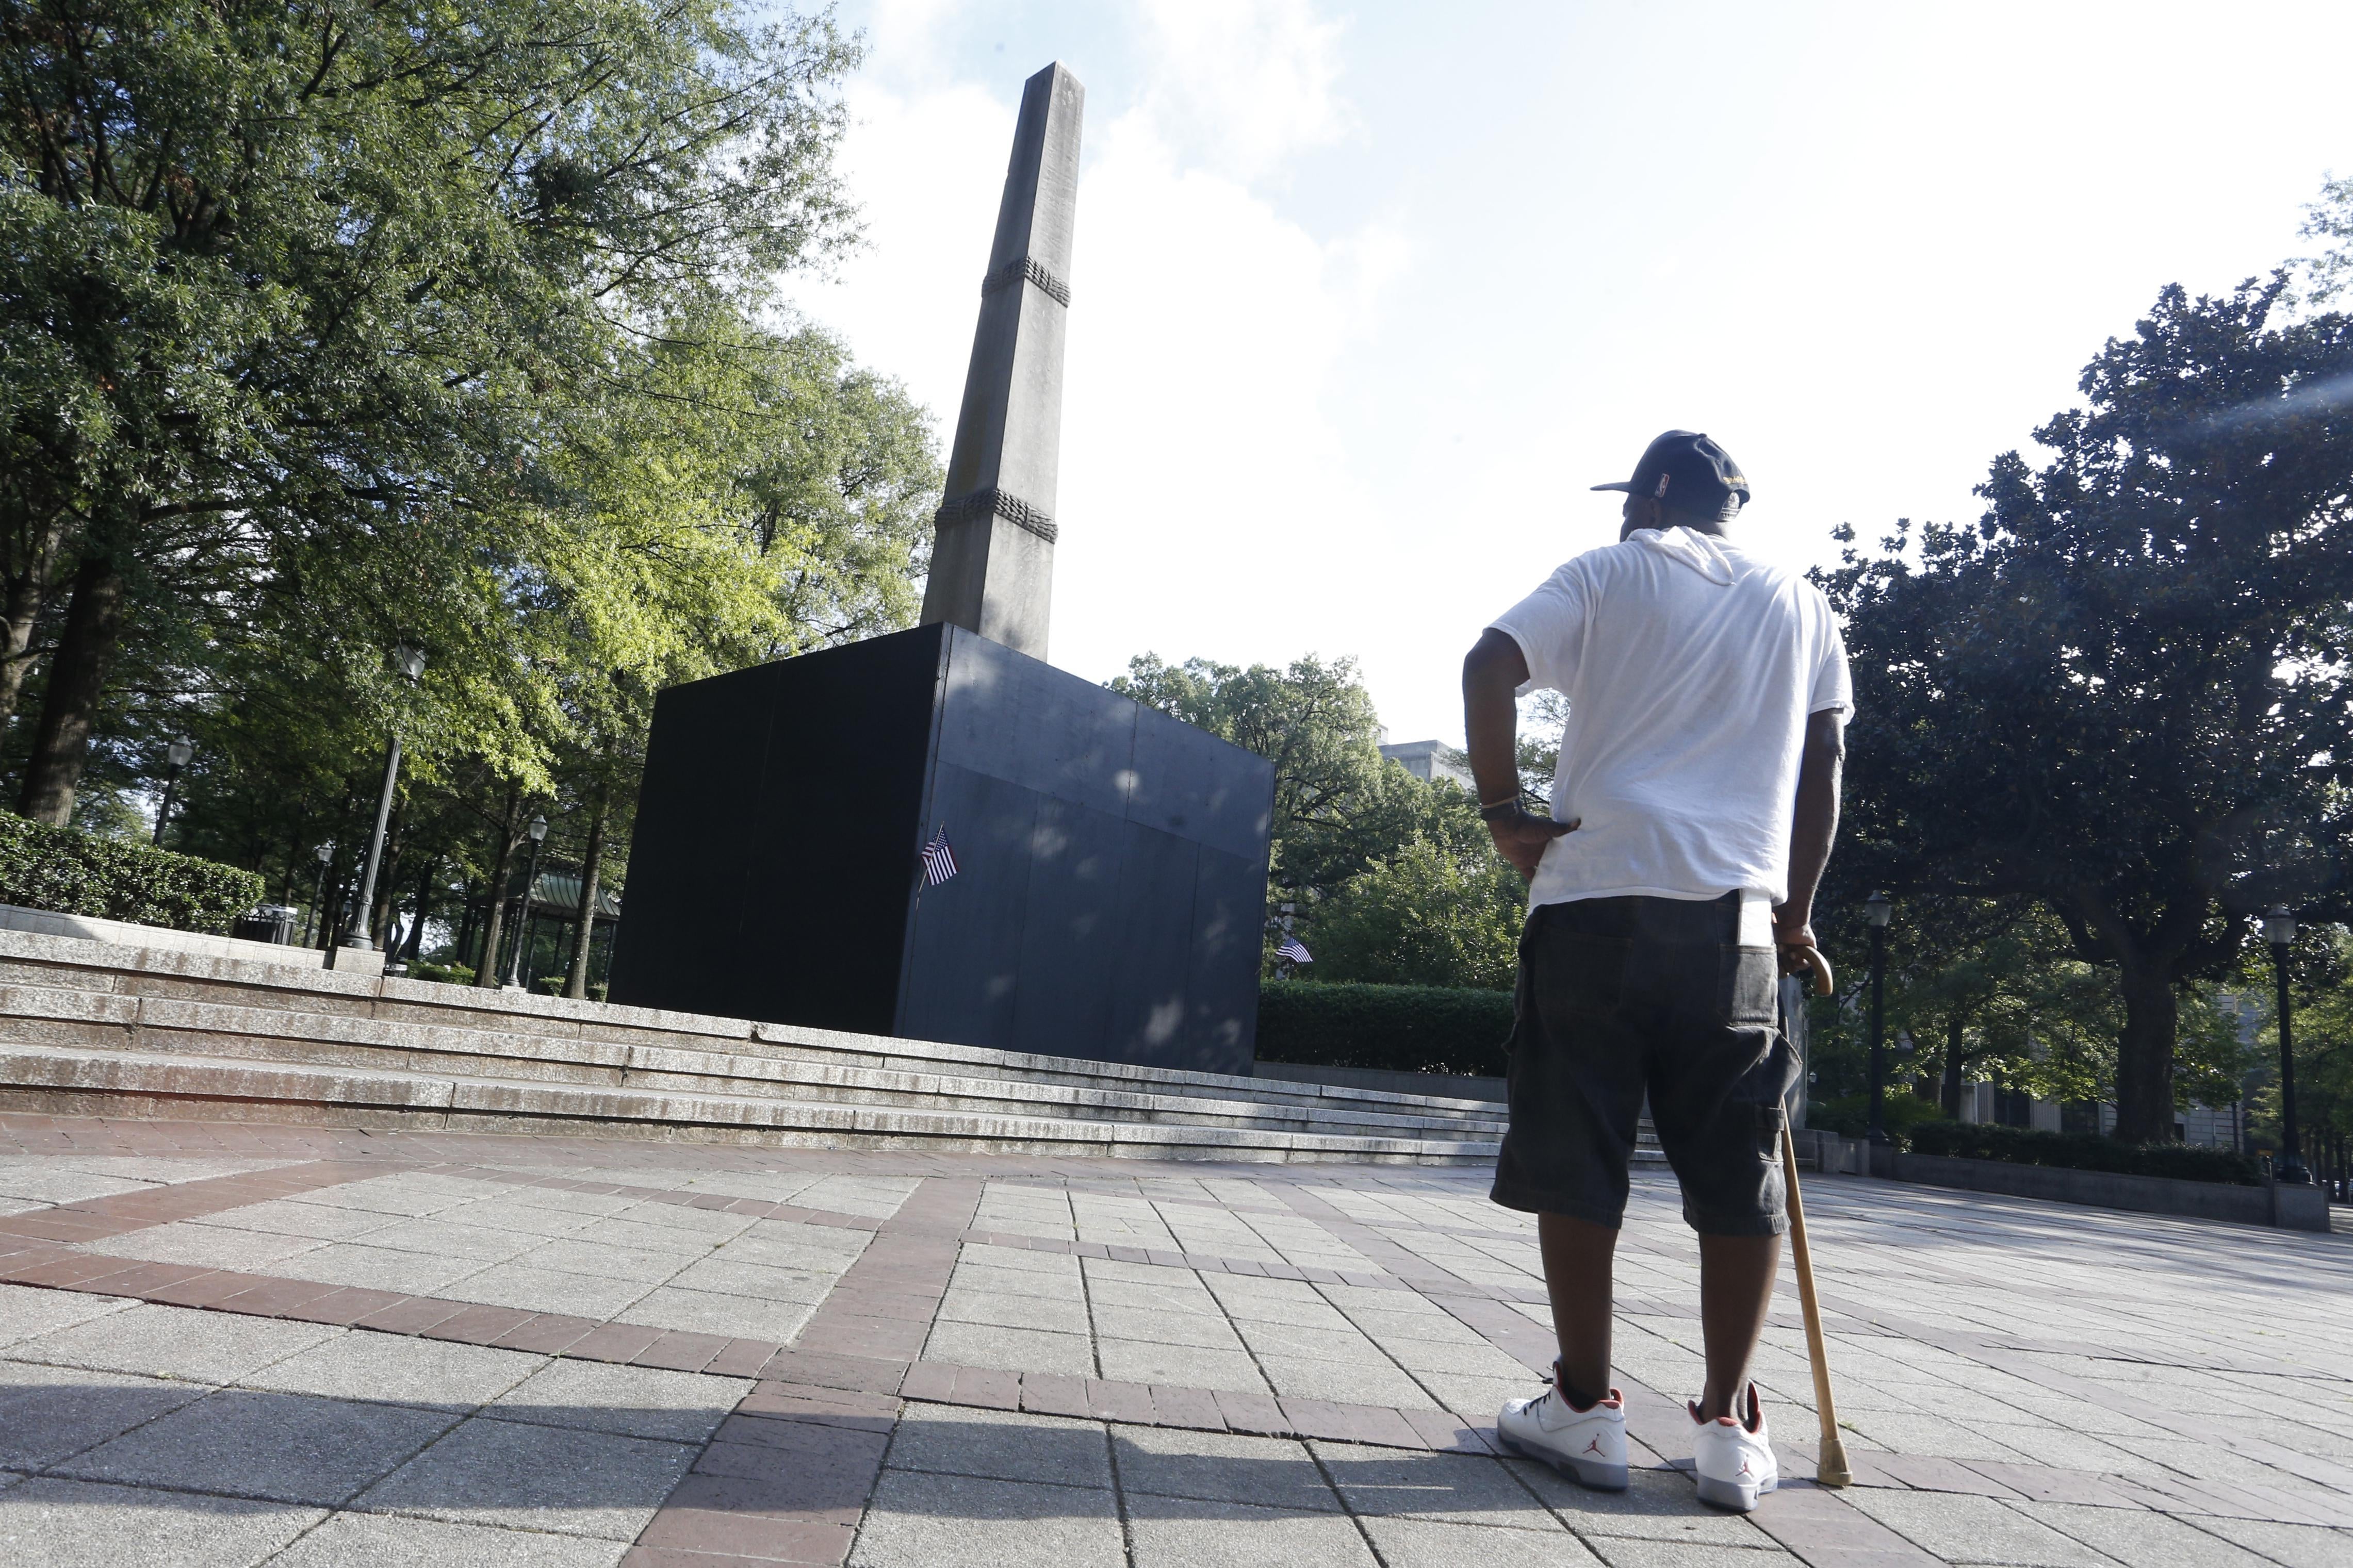 A man with a cane pauses to look at a now covered confederate monument in Linn Park in Birmingham, Alabama.